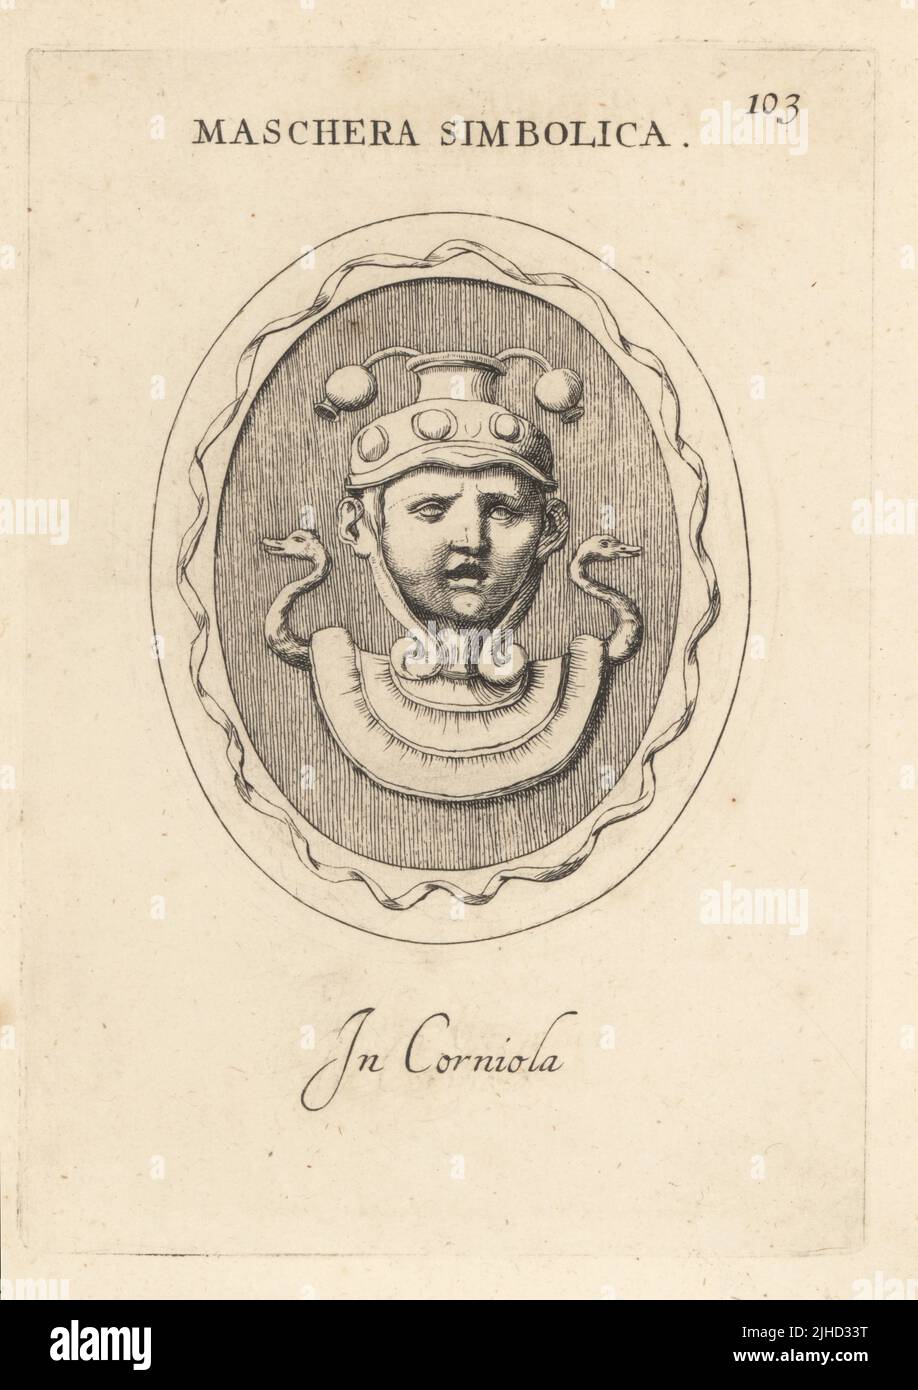 Mask symbolizing sleep. With pileus or hat with drooping opium poppies, and two swans (signifying death) on the shoulders. In carnelian. Maschera simbolica. In corniola. Copperplate engraving by Giovanni Battista Galestruzzi after Leonardo Agostini from Gemmae et Sculpturae Antiquae Depicti ab Leonardo Augustino Senesi, Abraham Blooteling, Amsterdam, 1685. Stock Photo